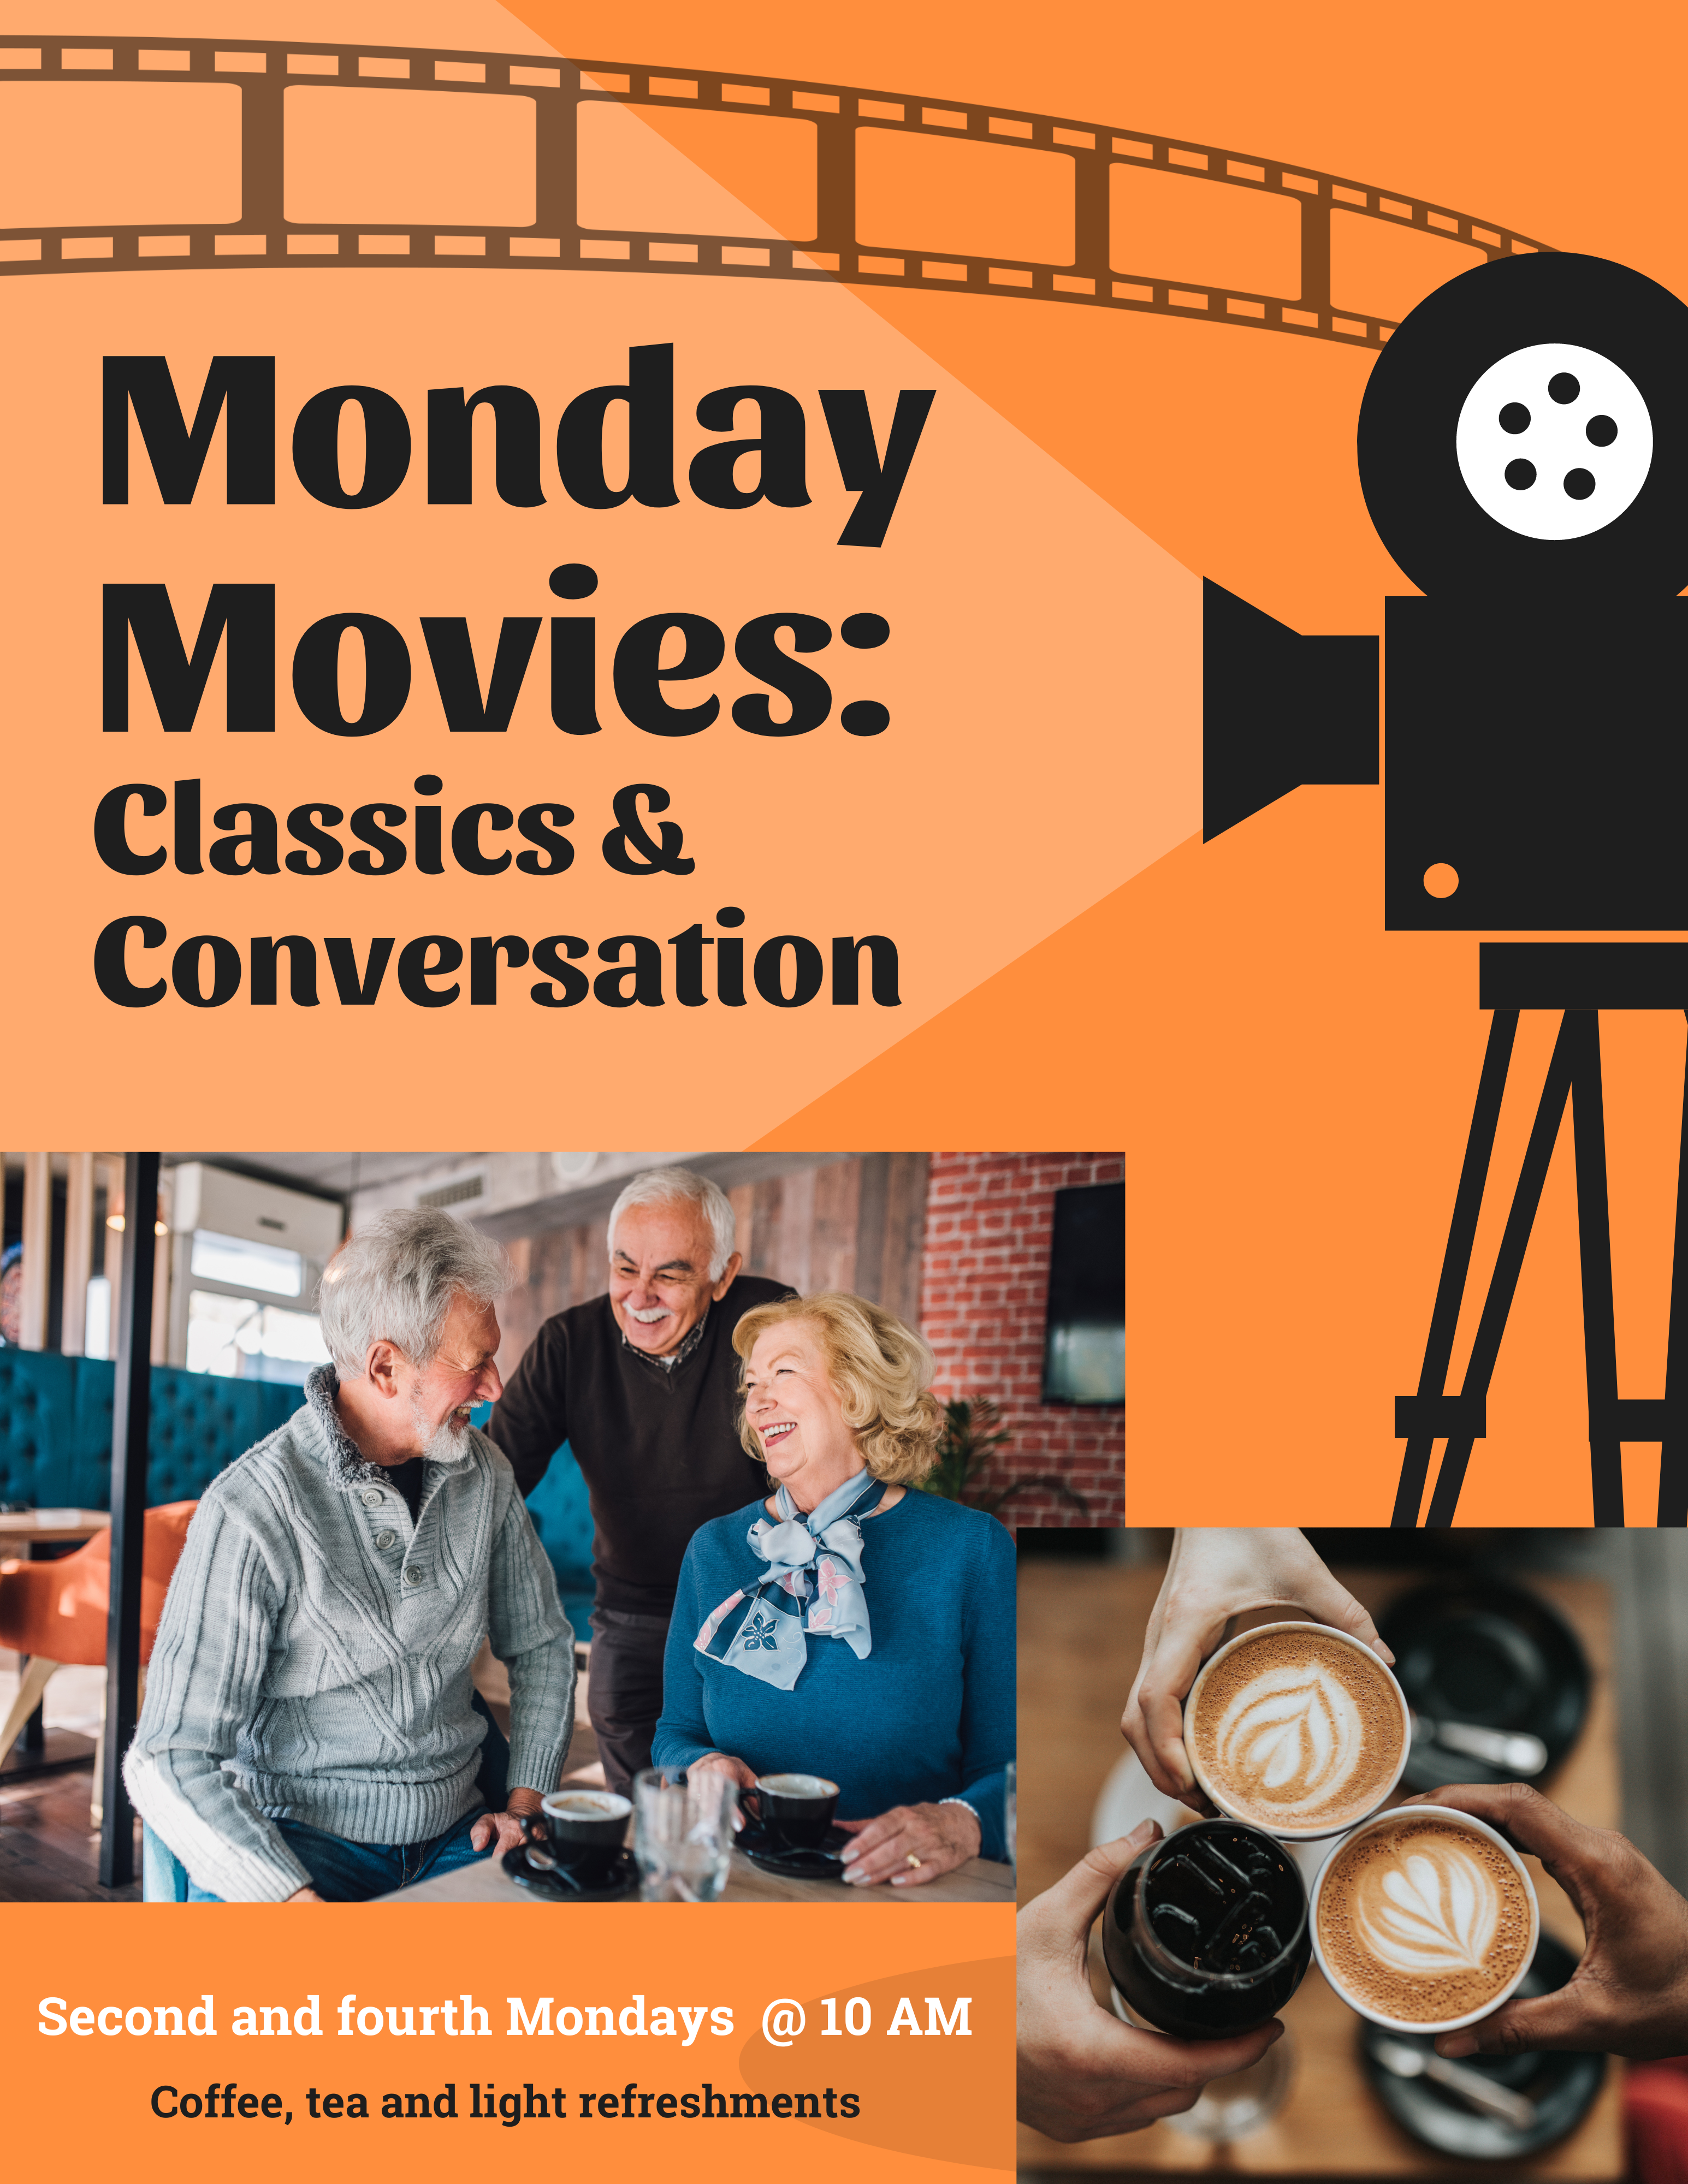 Monday Movies Classics & Conversation Movie Projector Three Adults Sitting and a cup of coffee 